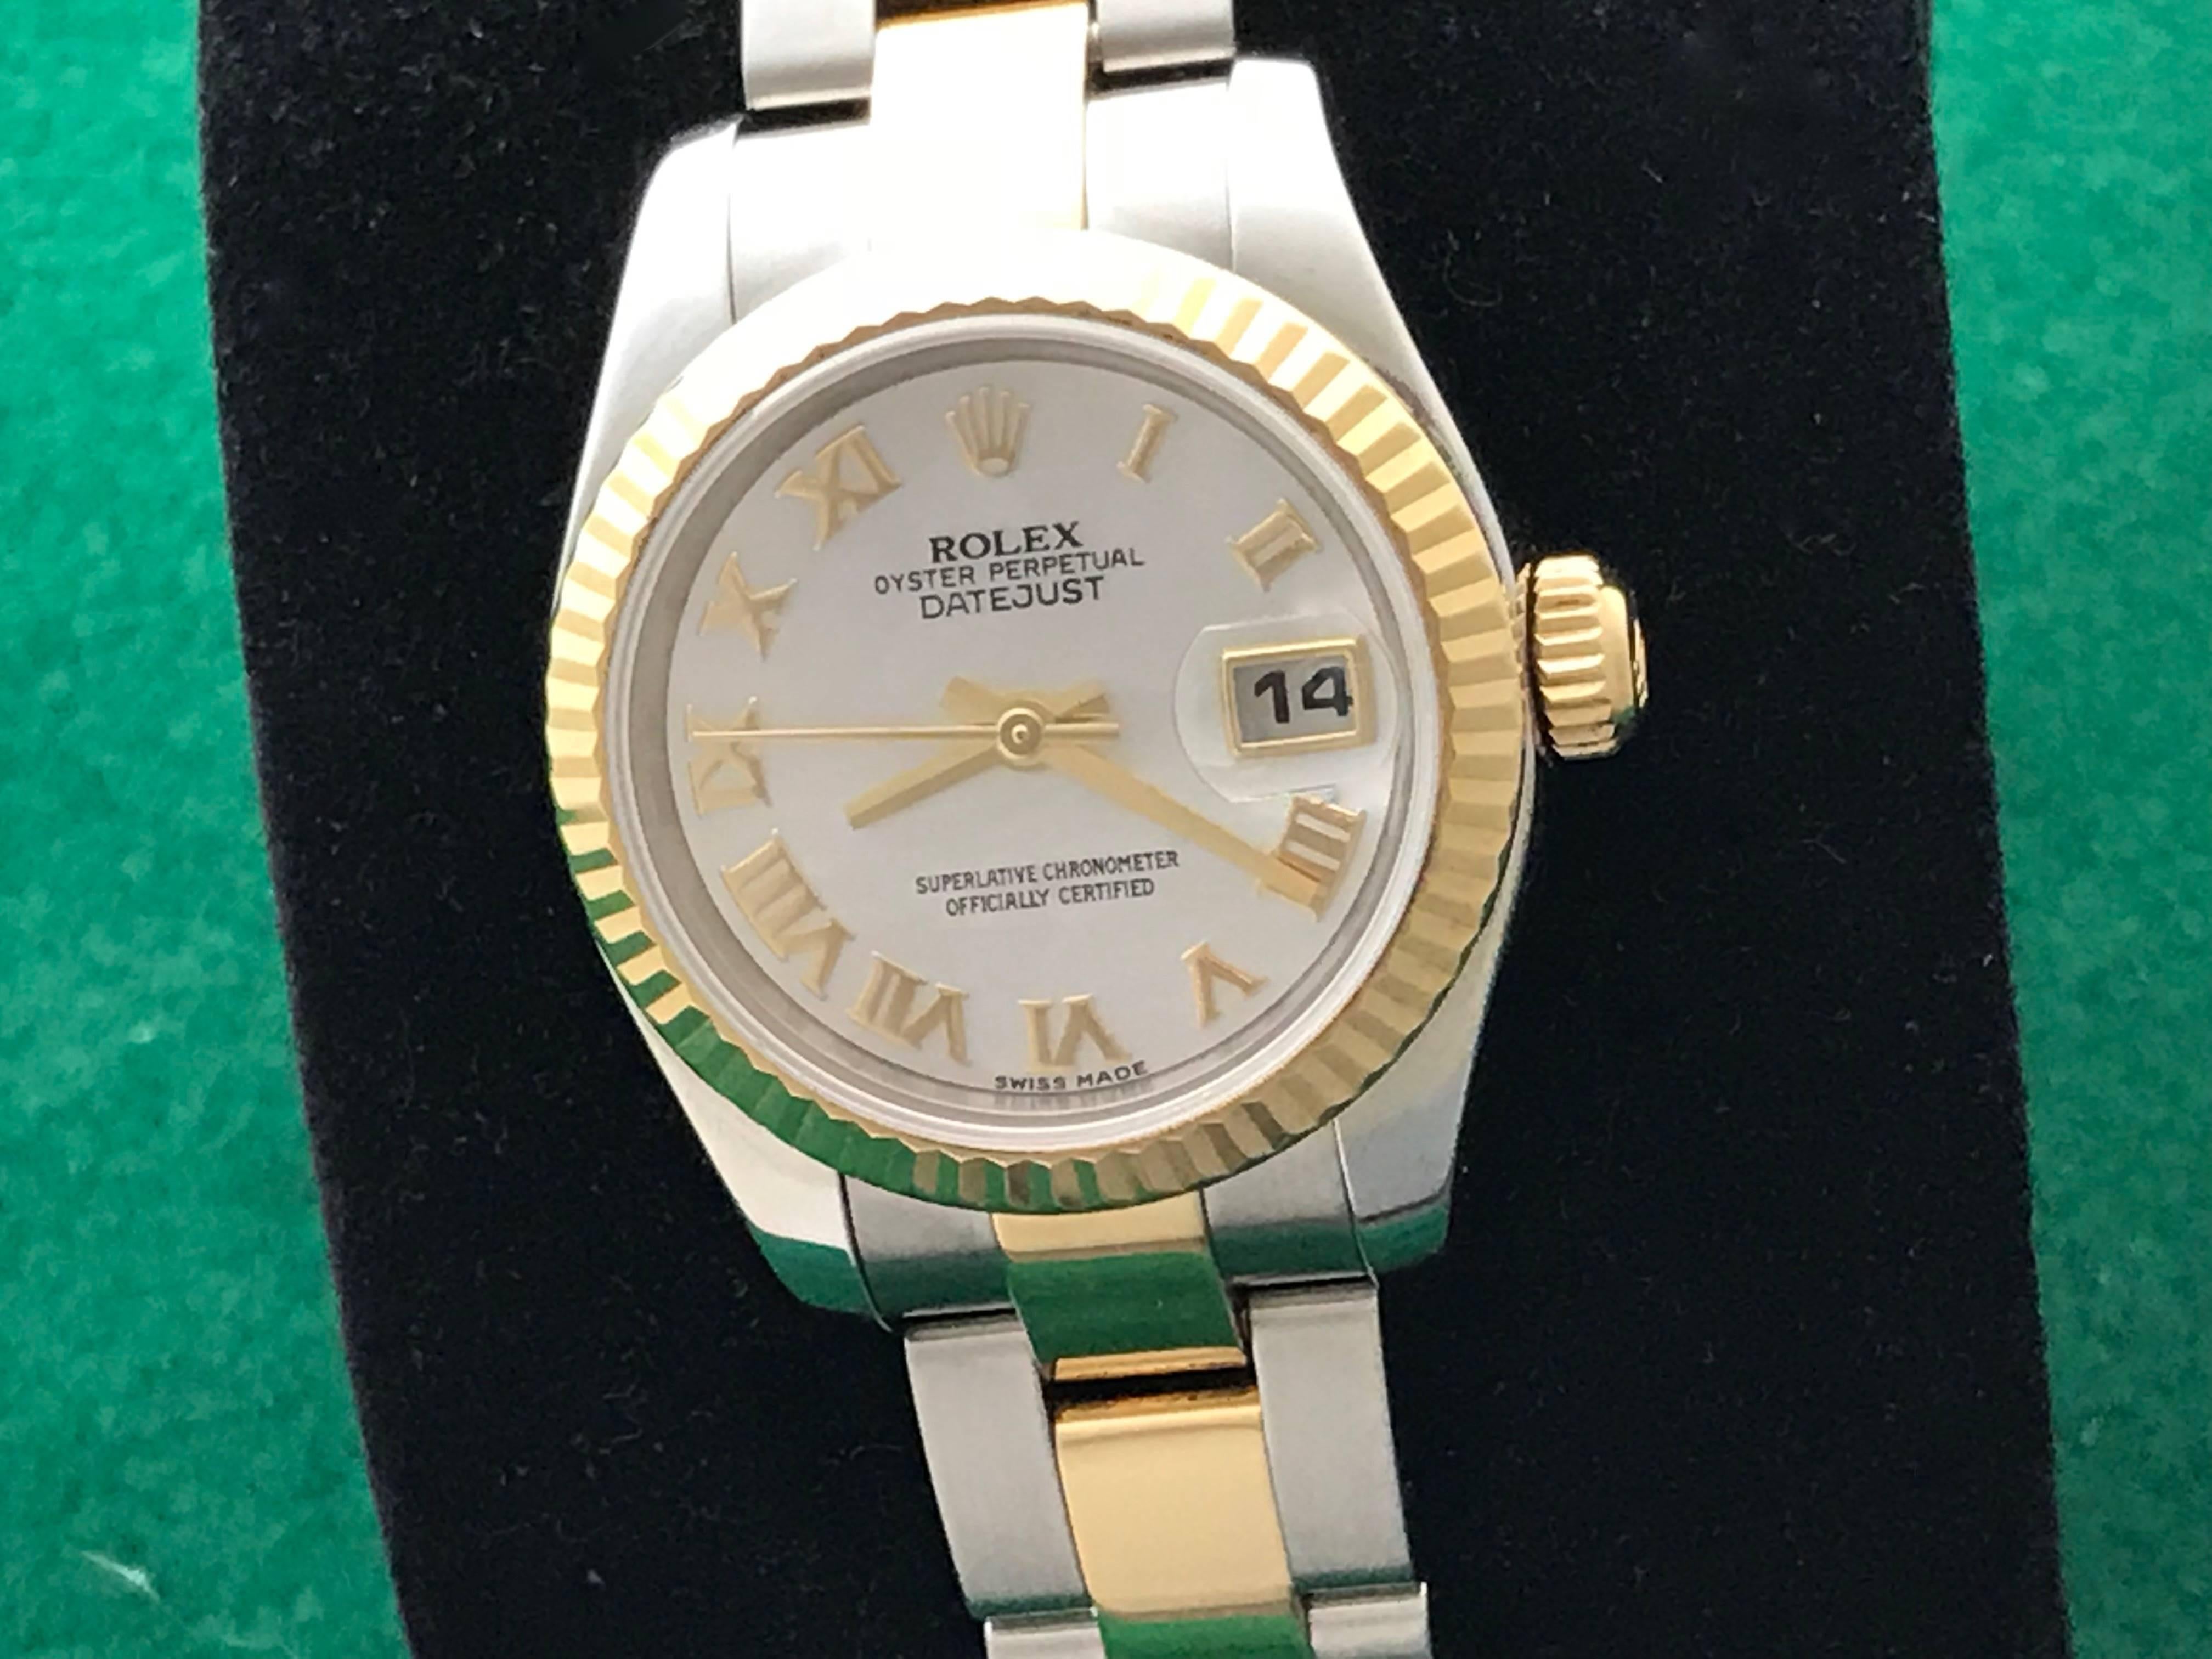 Manufacturer: Rolex
Model Name: Datejust
Model Num: 179173
Condition: Pre Owned
Watch Category: Contemporary
Gender: Ladies
Movement Comment: Oyster Perpetual
Movement: Automatic Winding
Dial: Rolex Mother of Pearl Dial with Roman numerals
Case: